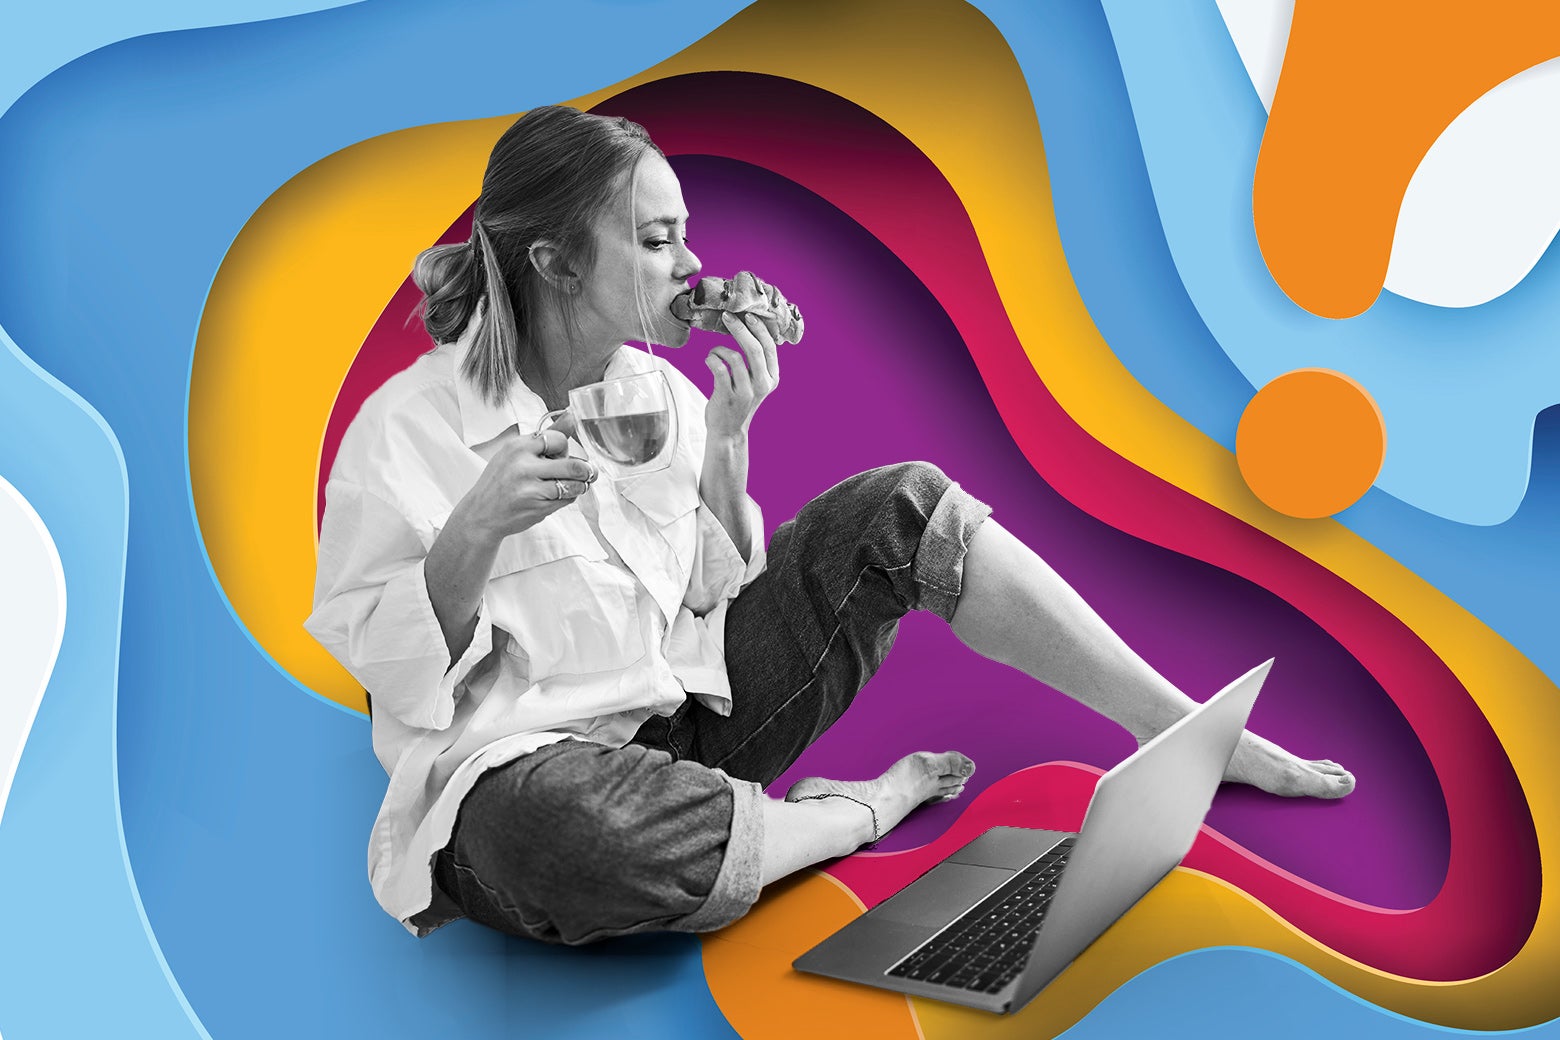 A woman eating a croissant and using her laptop on the floor.